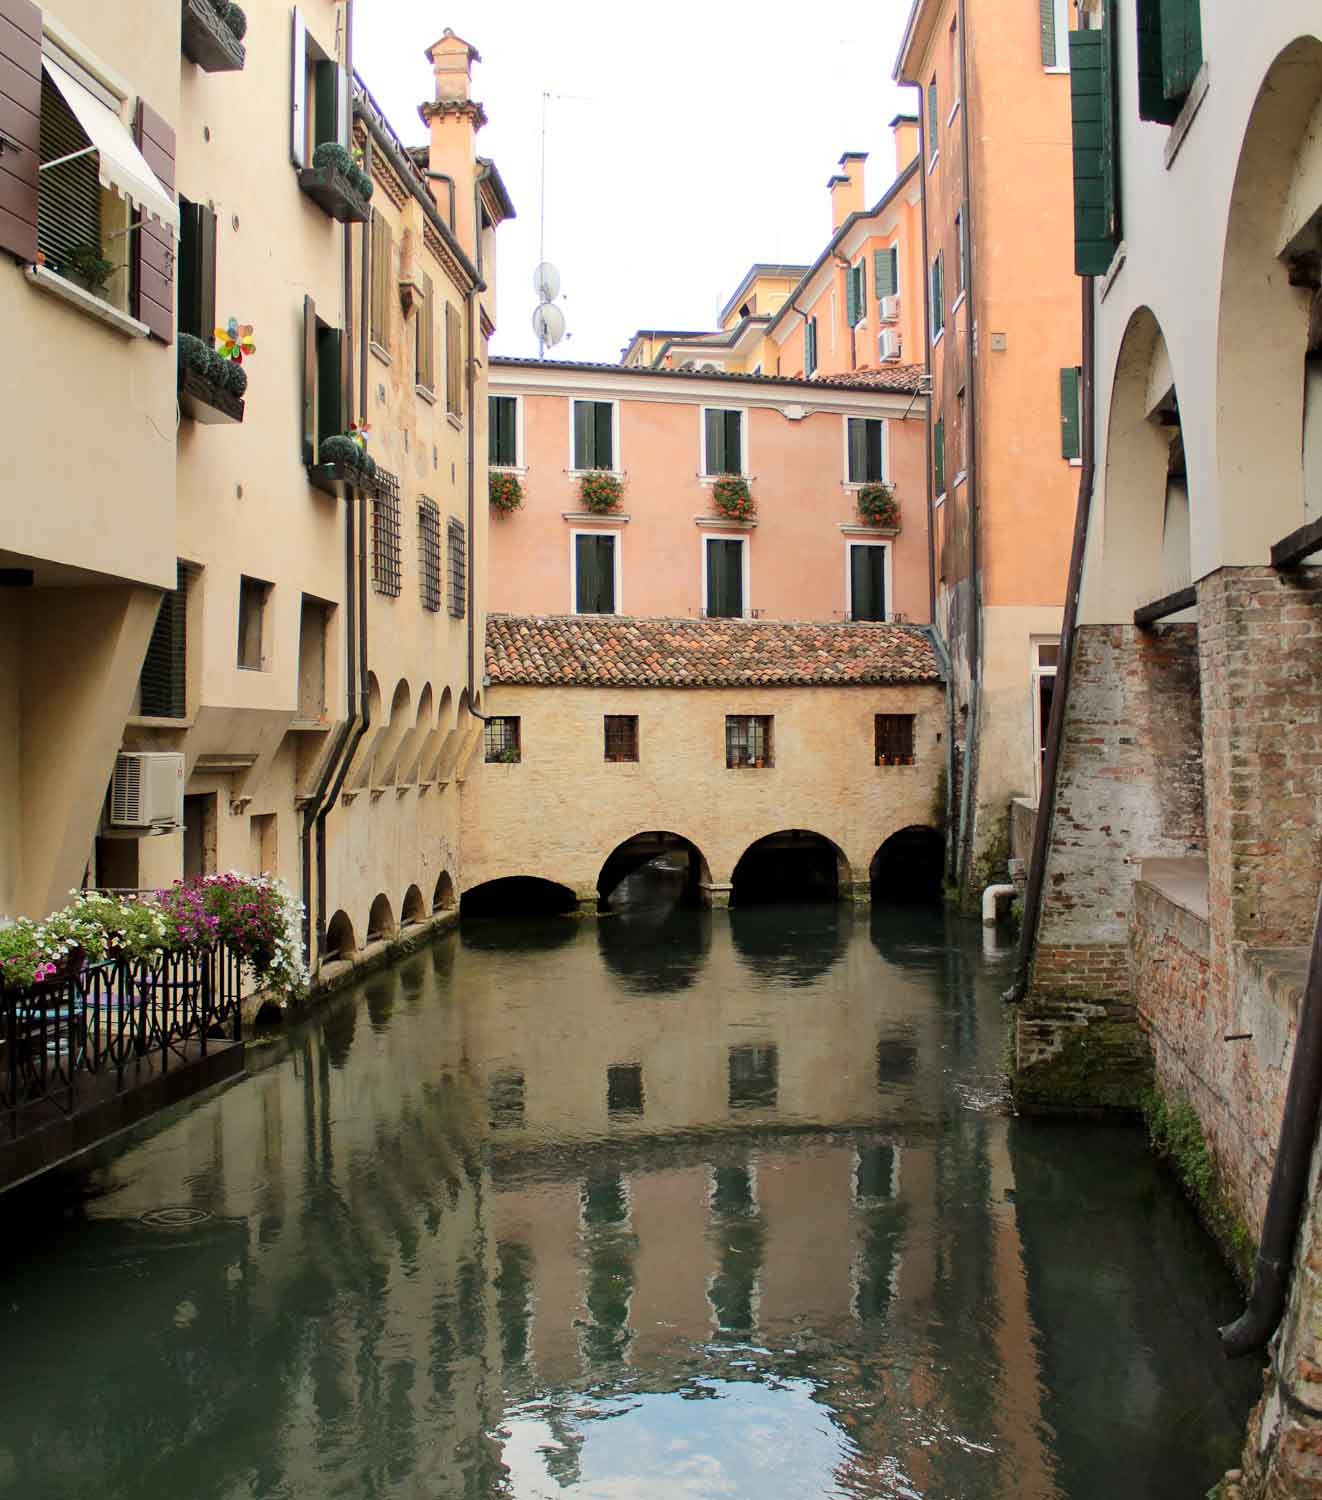 What to do in Treviso